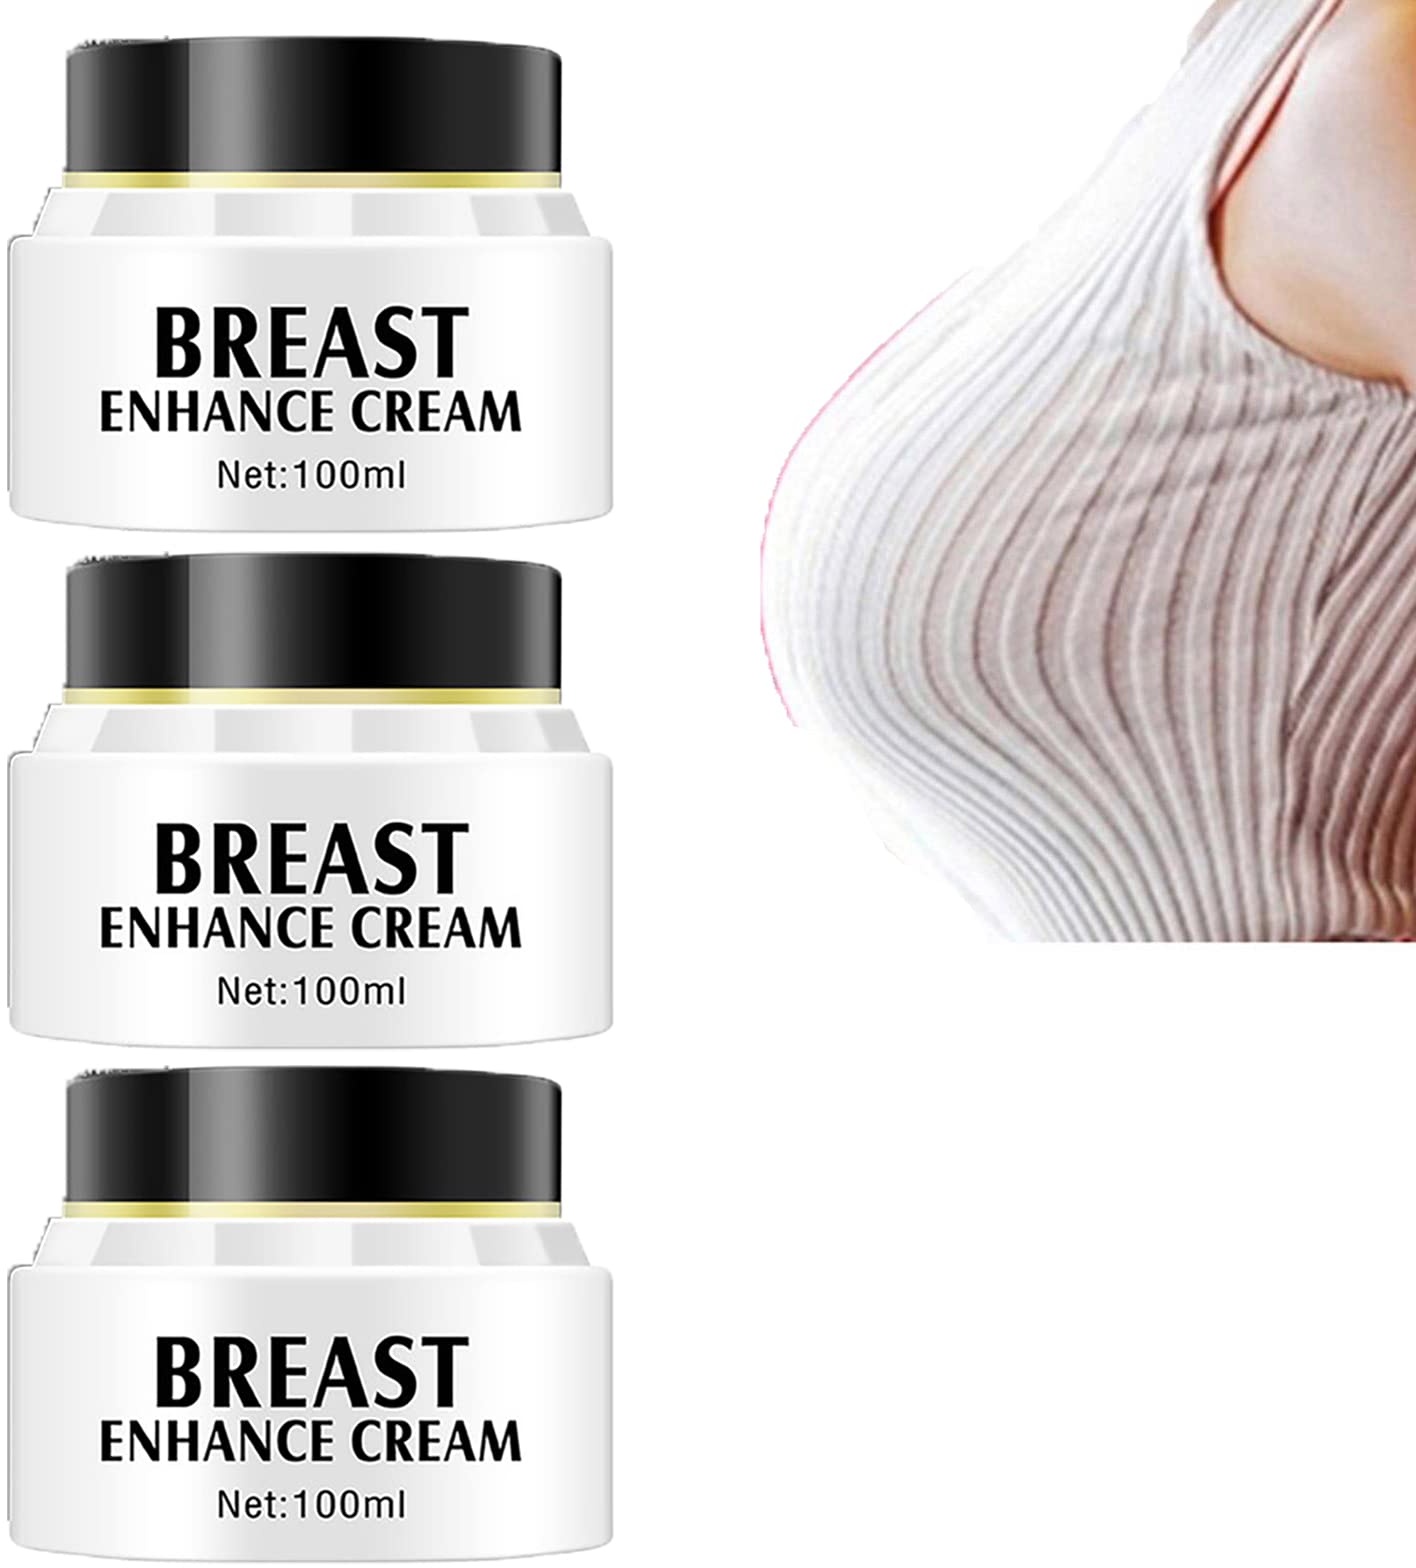 Goddes Breast Enhance Cream,Breast Enlargement Cream Fast Growth,Breast Enhancement Shaping Perfection Cream,Nourishing Fuller Breasts Lifts your Boobs for Perfect Body Curve (3PCS)